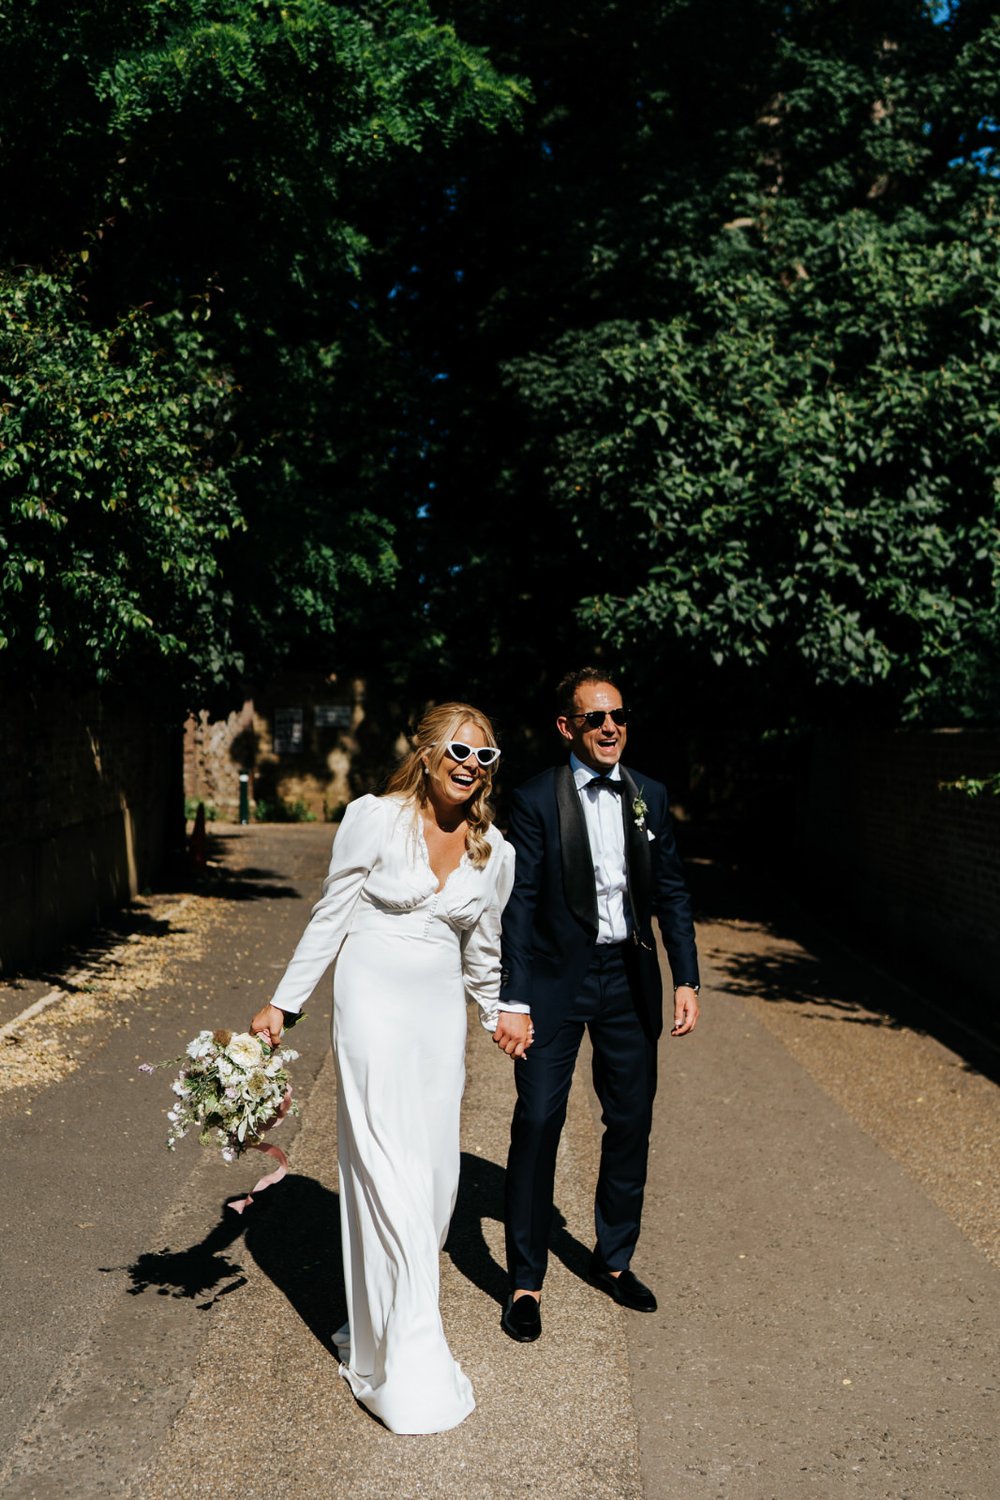 Bride and groom, basking in the sun, smile as they look dapper in wedding outfit and sunglasses